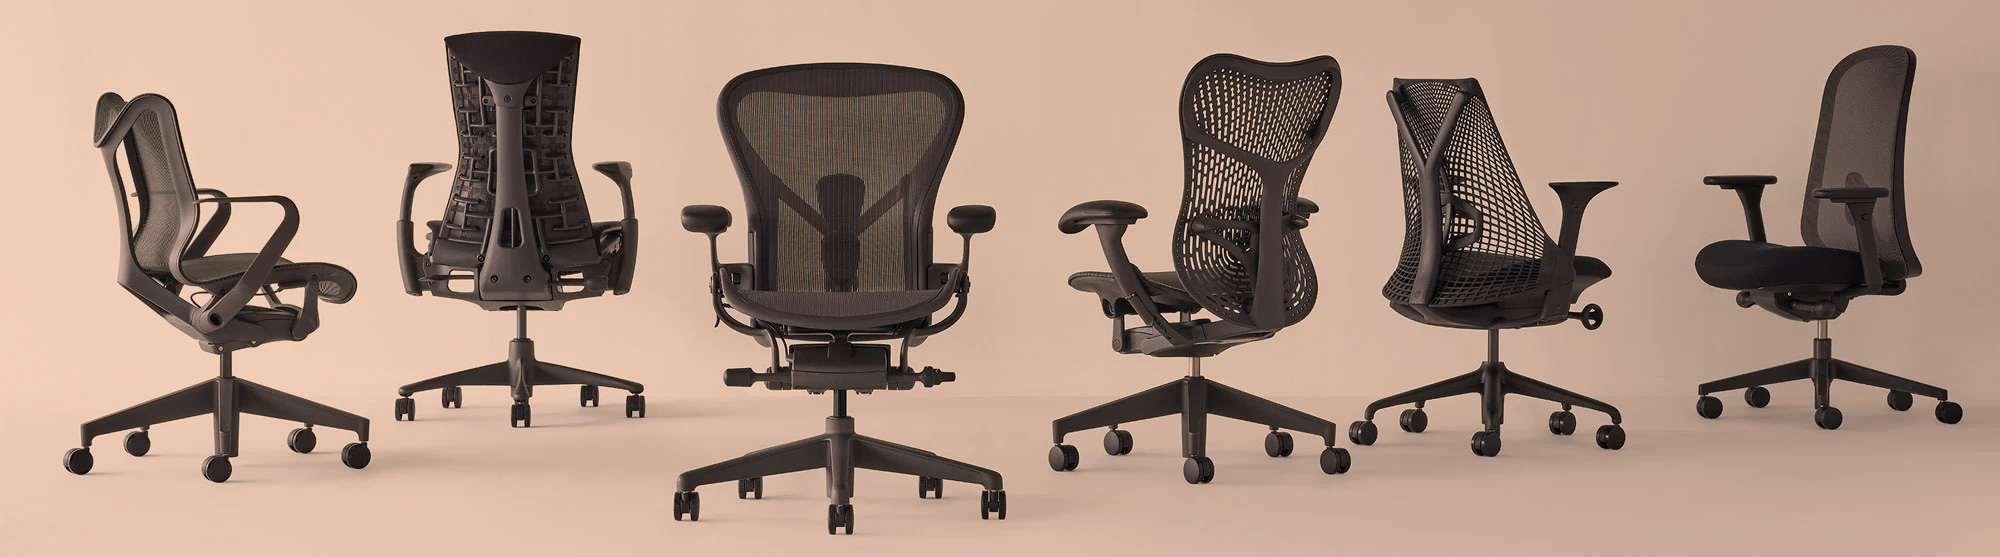 PURE Workplace Solutions Introduces the Latest Herman Miller Chair Collection